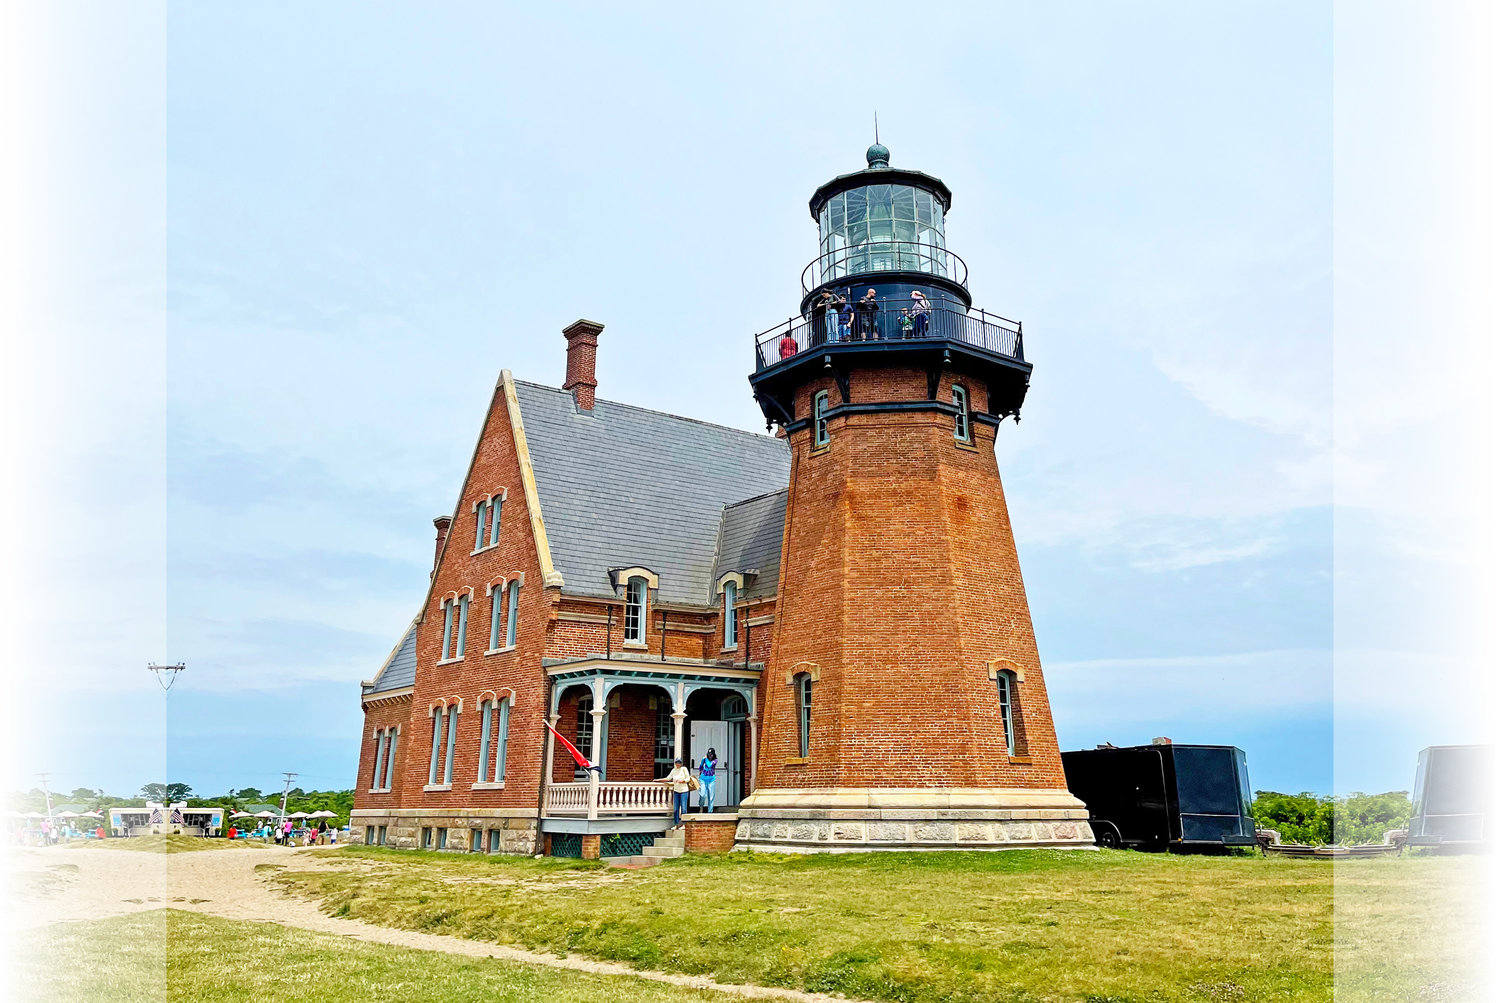 The island boasts two lighthouses with the easiest to access being Southeast Light on Mohegan Bluffs. Built in 1875, it was moved 300 feet inland in 1993 due to the erosion of its original perch.